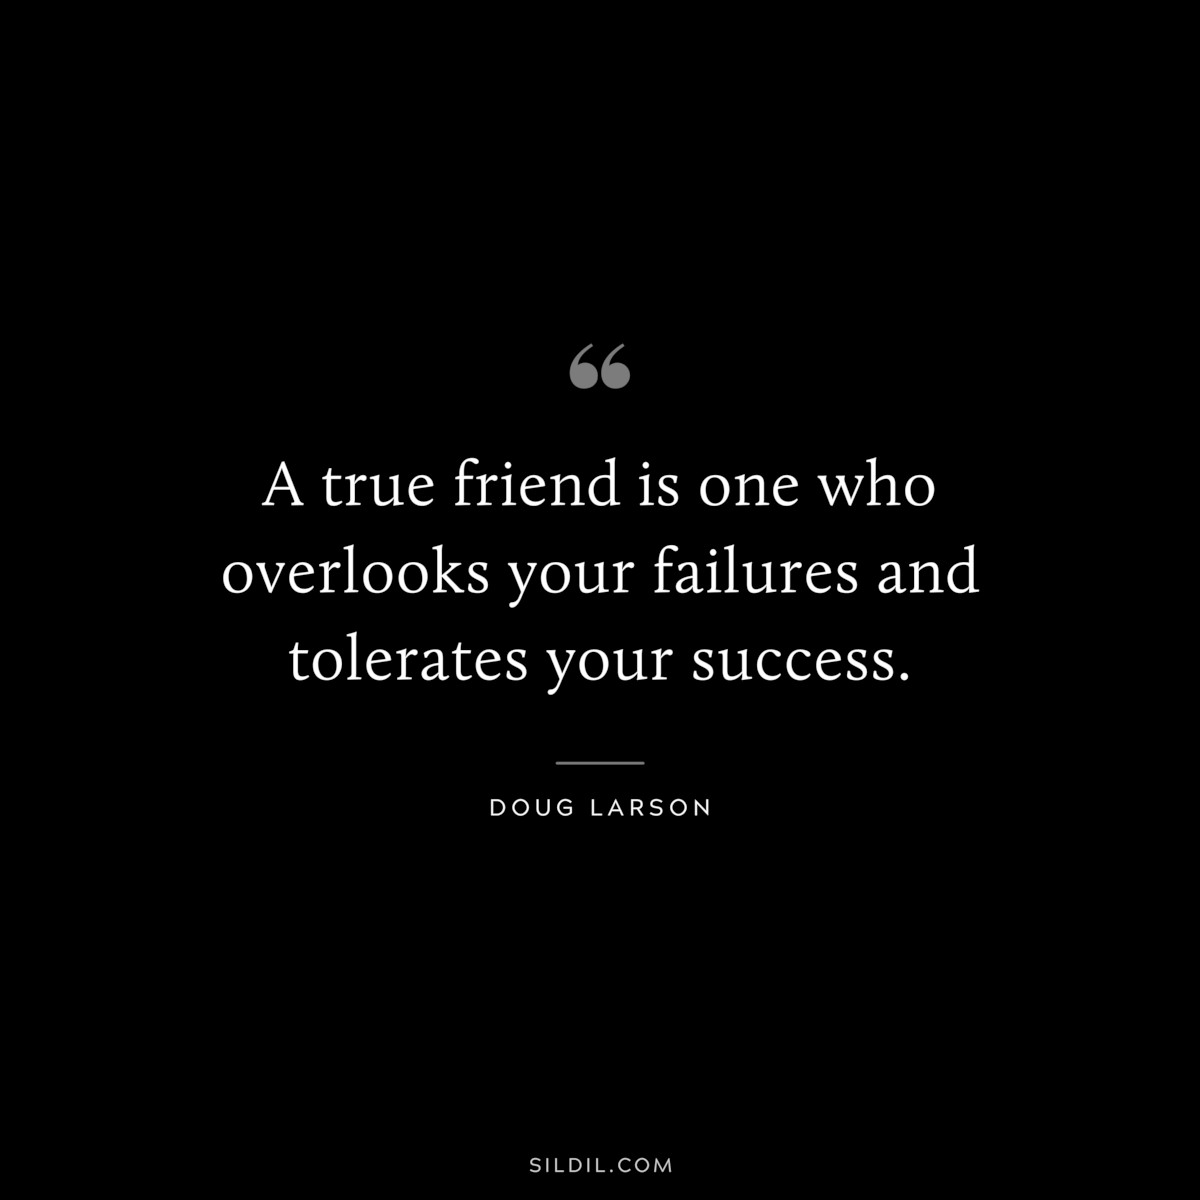 A true friend is one who overlooks your failures and tolerates your success. ― Doug Larson